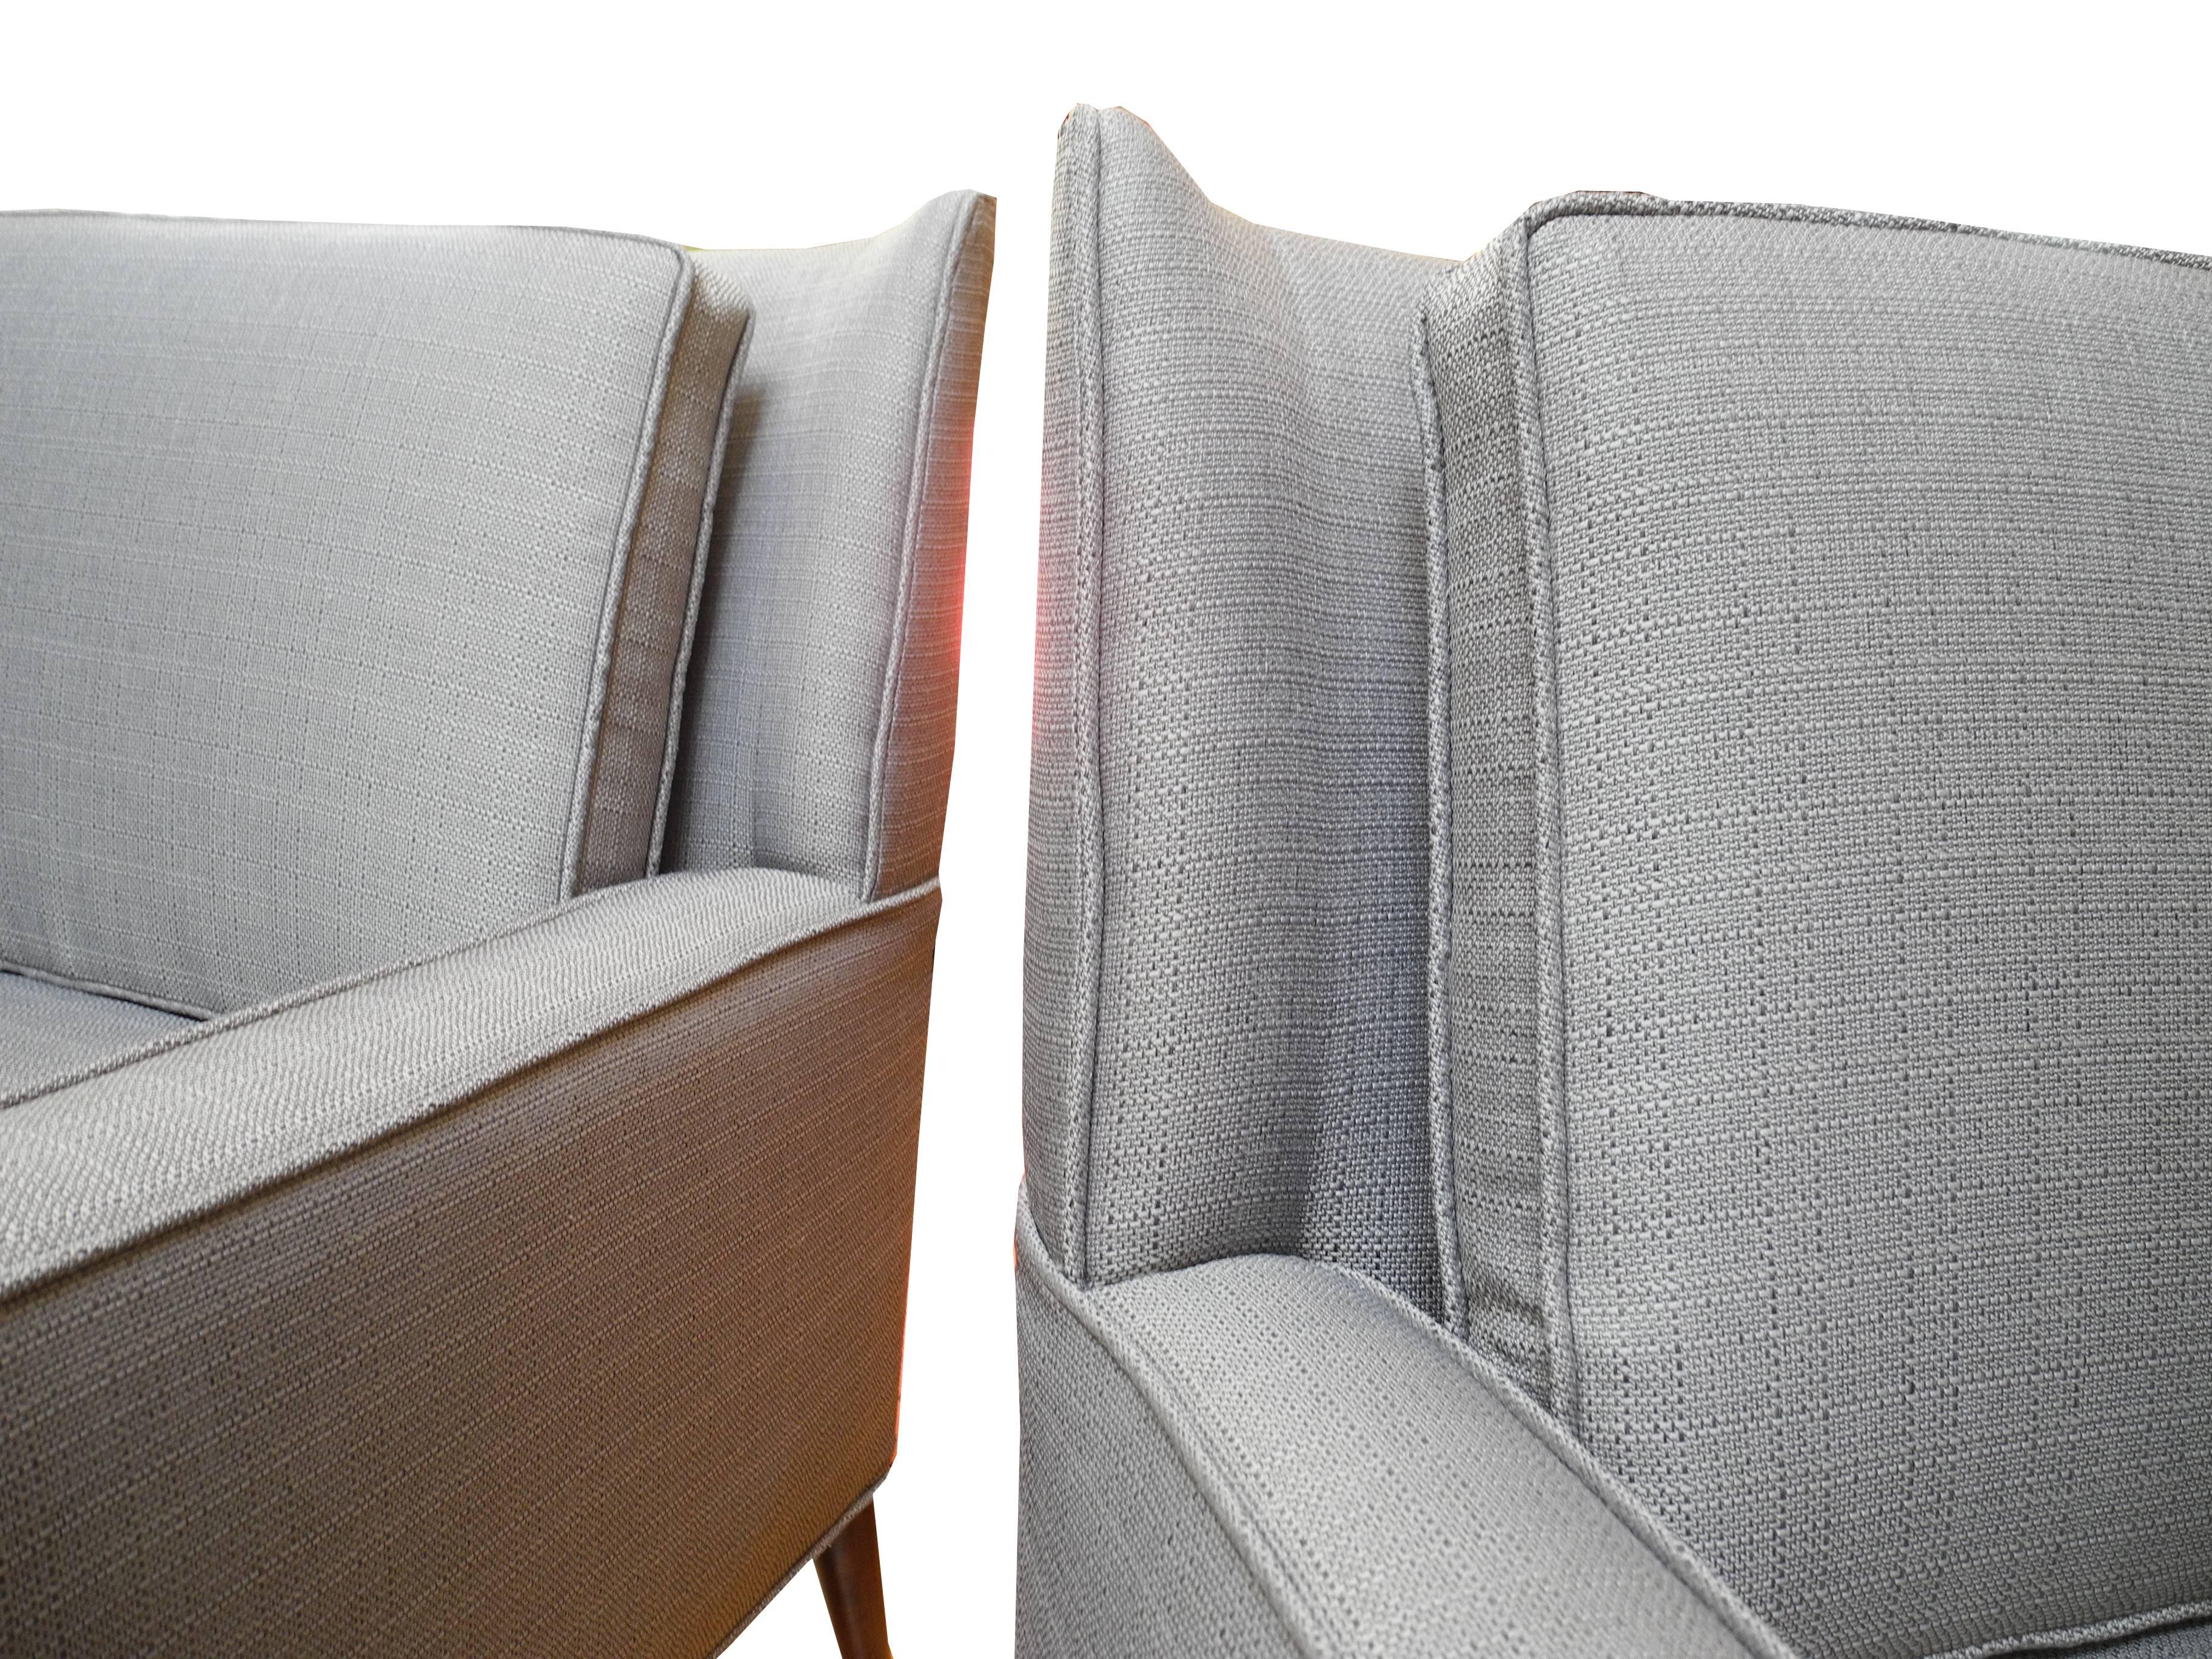 Pair of Modern Upholstered Lounge Chairs Designed by Paul McCobb for Directional For Sale 1